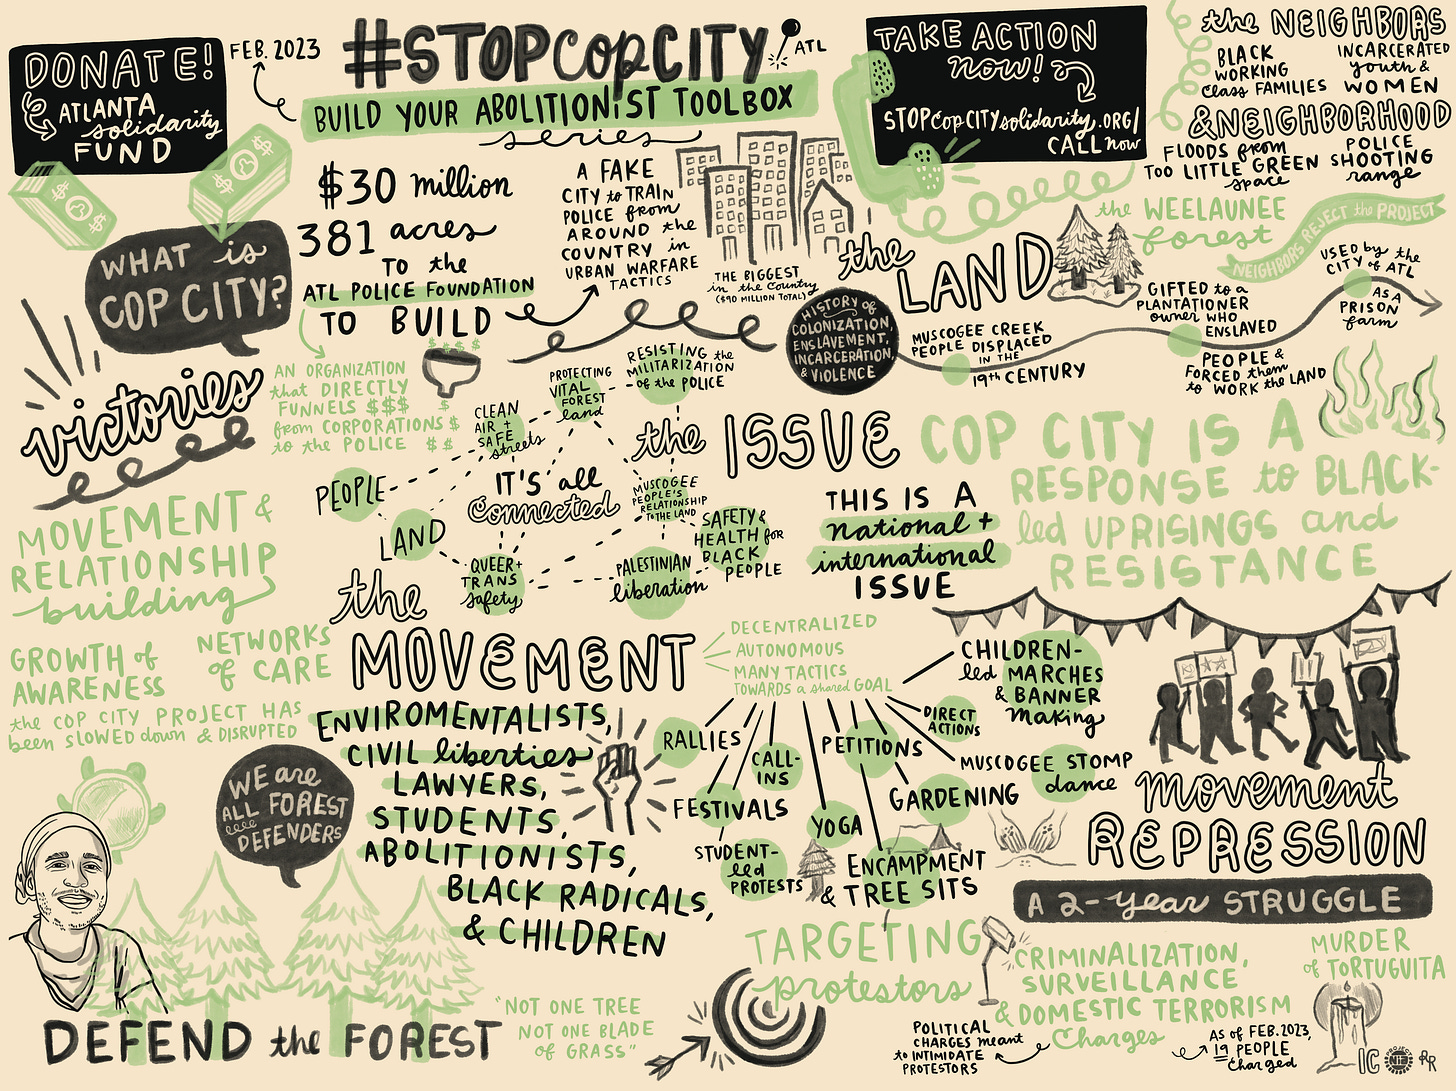 Handwritten and Illustrated notes on the #StopCopCity movement